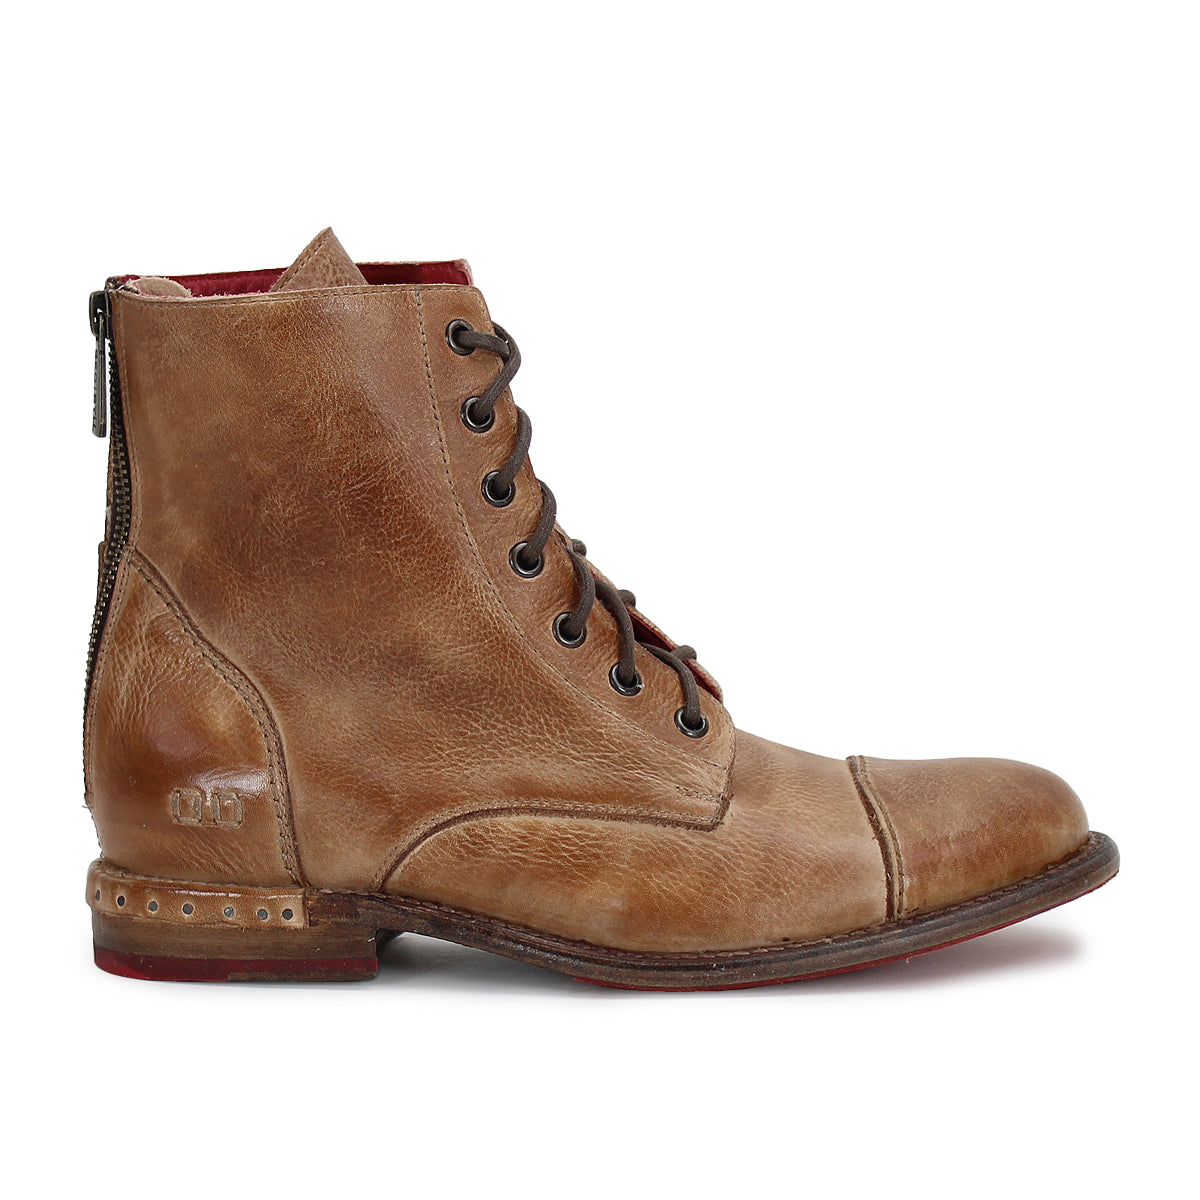 A men's Laurel leather boot with a red sole from Bed Stu.